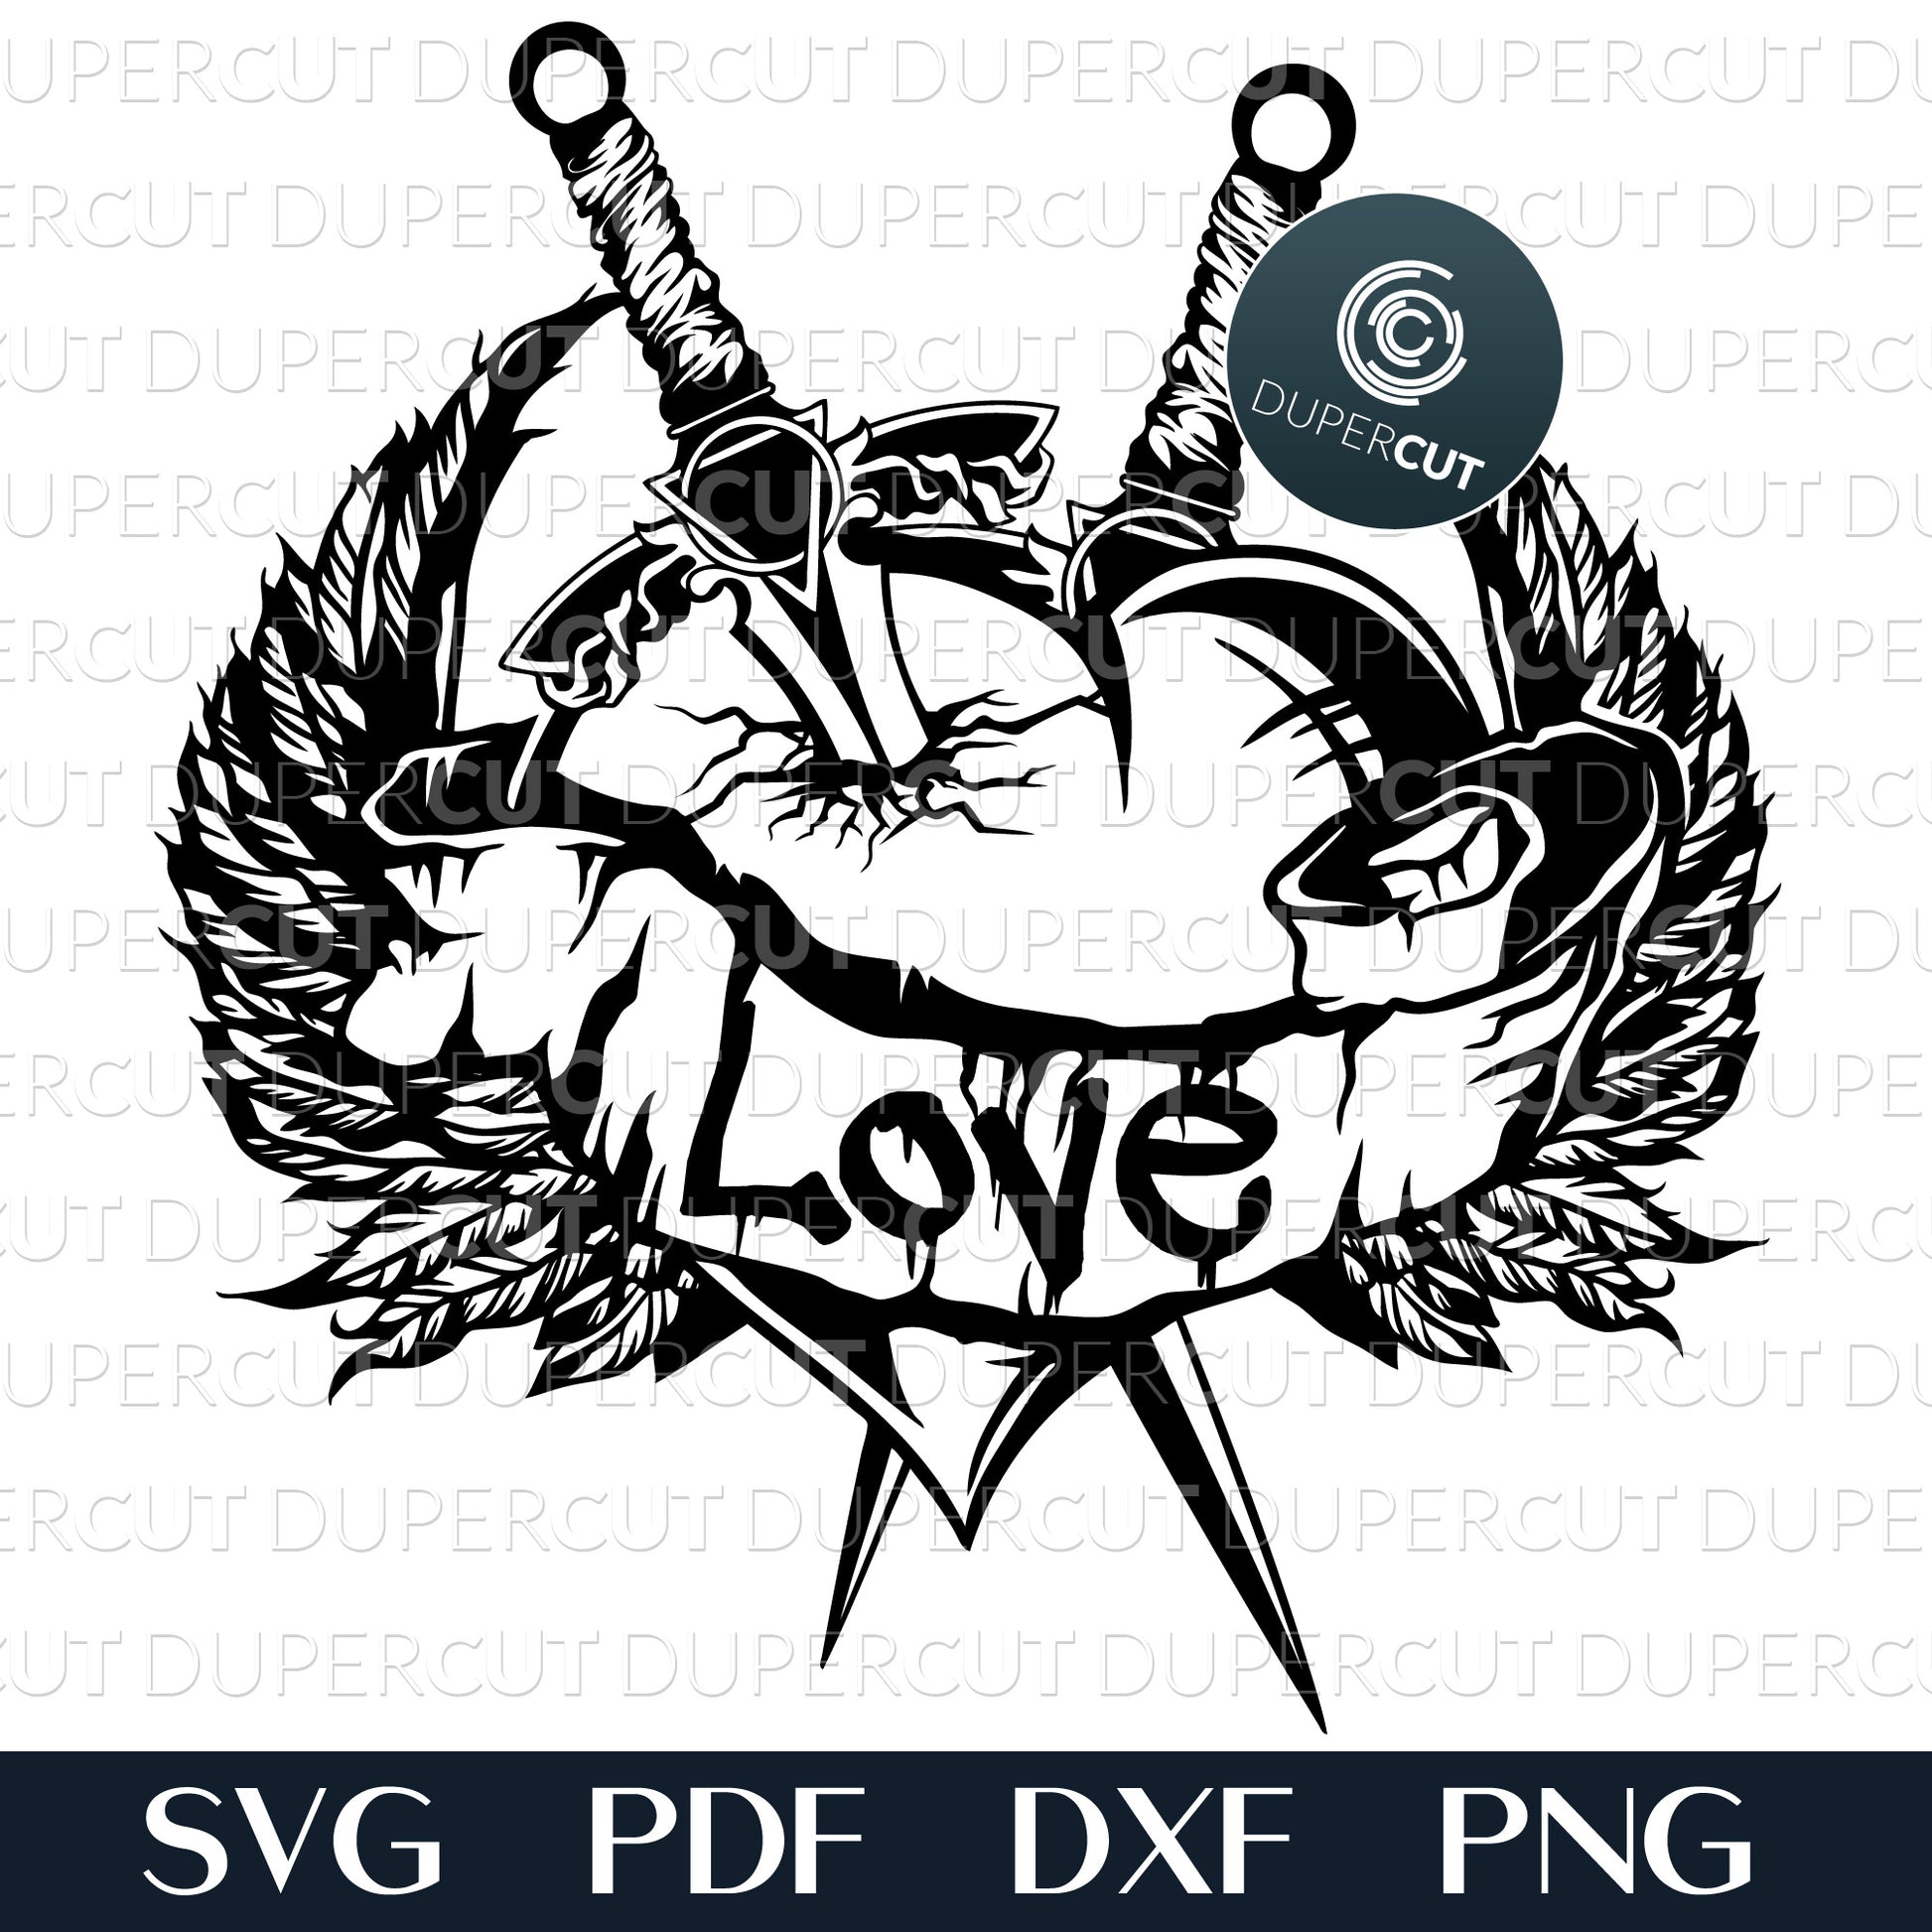 Winged heart with daggers, tattoo style line art. Papercutting template for commercial use. SVG files for Silhouette Cameo, Cricut, Glowforge, DXF for CNC, laser cutting, print on demand